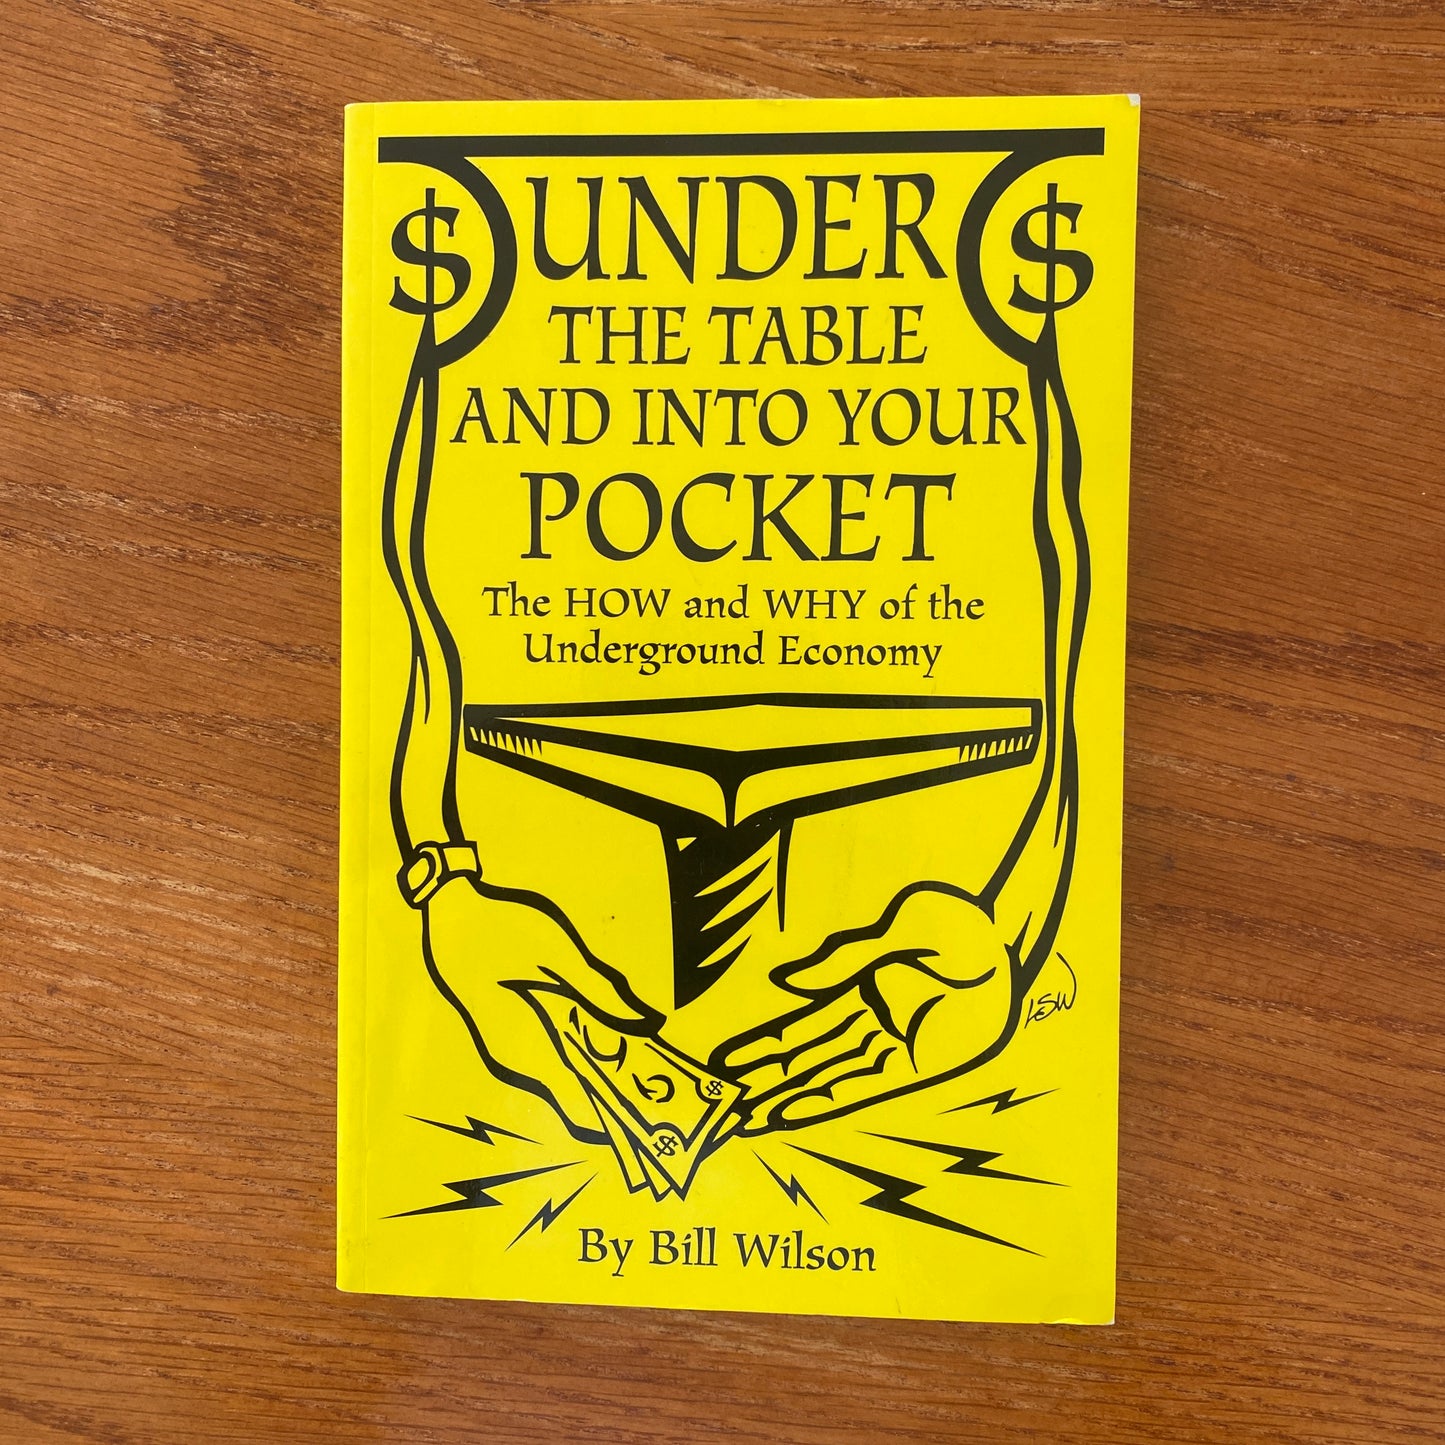 Under The Table And Into Your Pocket - Bill Wilson